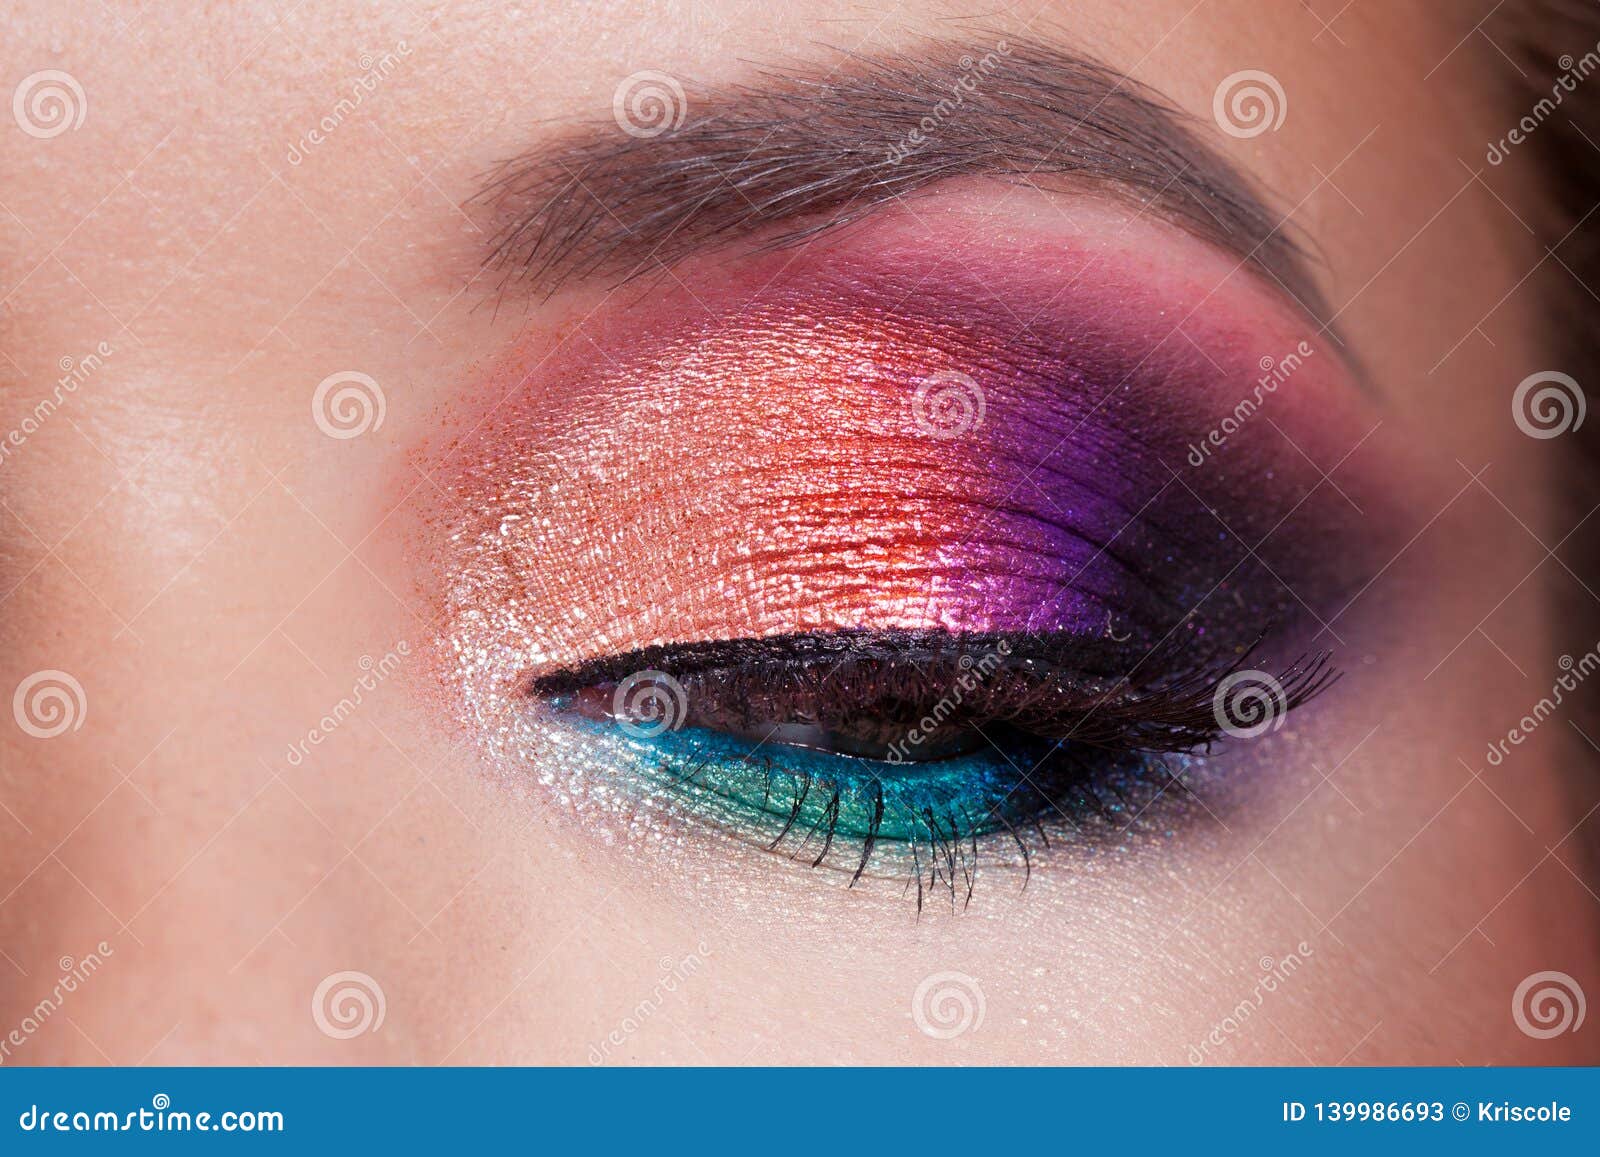 Makeup Of Eyes With Rainbow Colored Eyeshadows Background, Cute Makeup  Picture Background Image And Wallpaper for Free Download